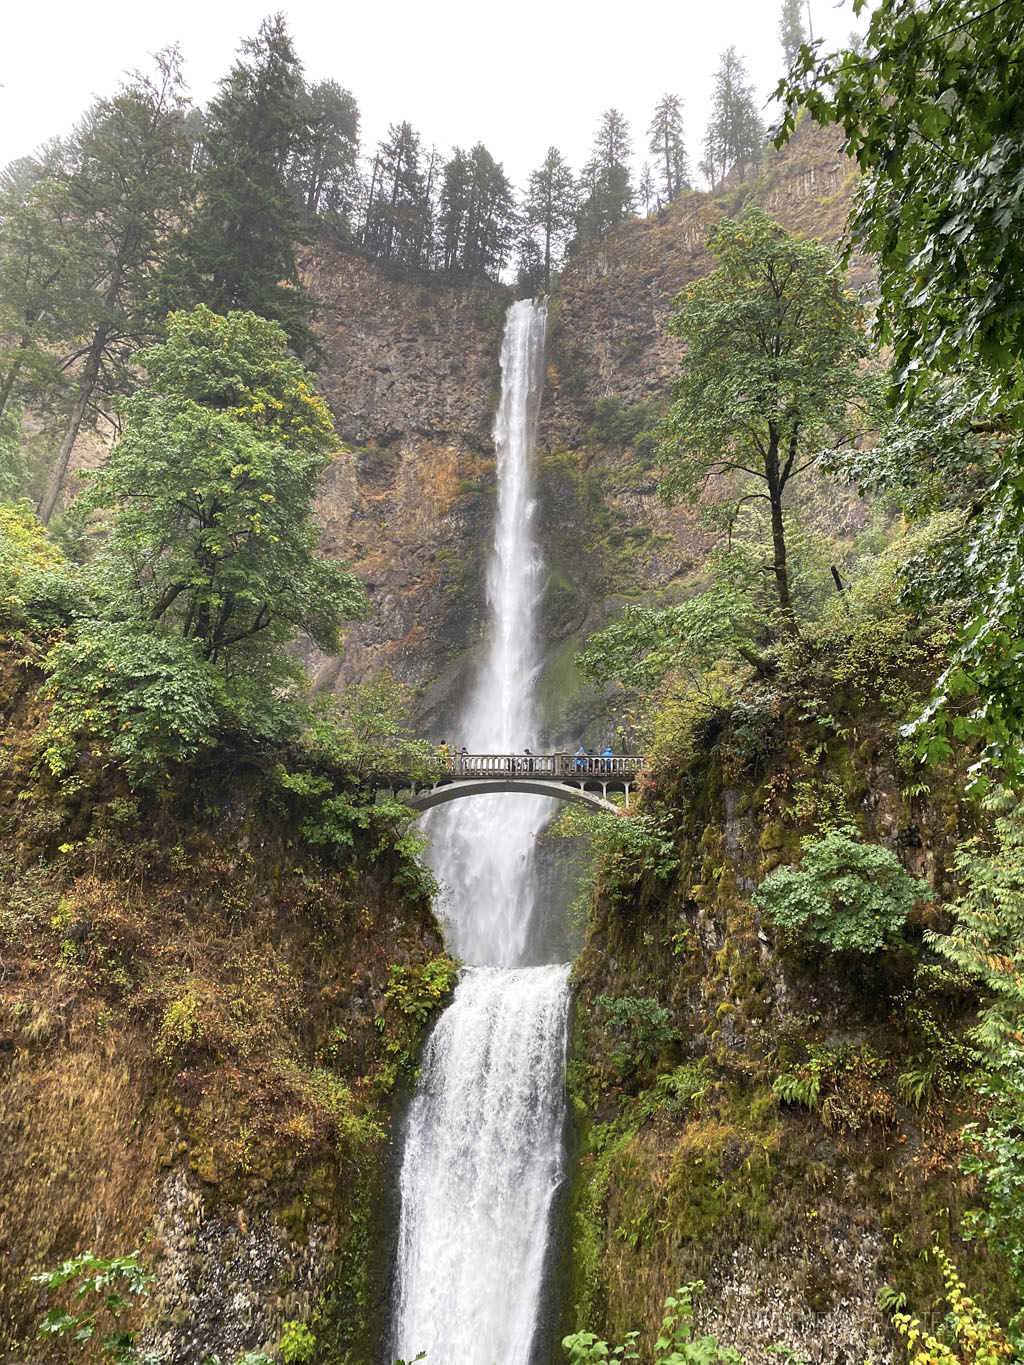 Multonomah Falls, a must see on any of these Pacific Northwest tours